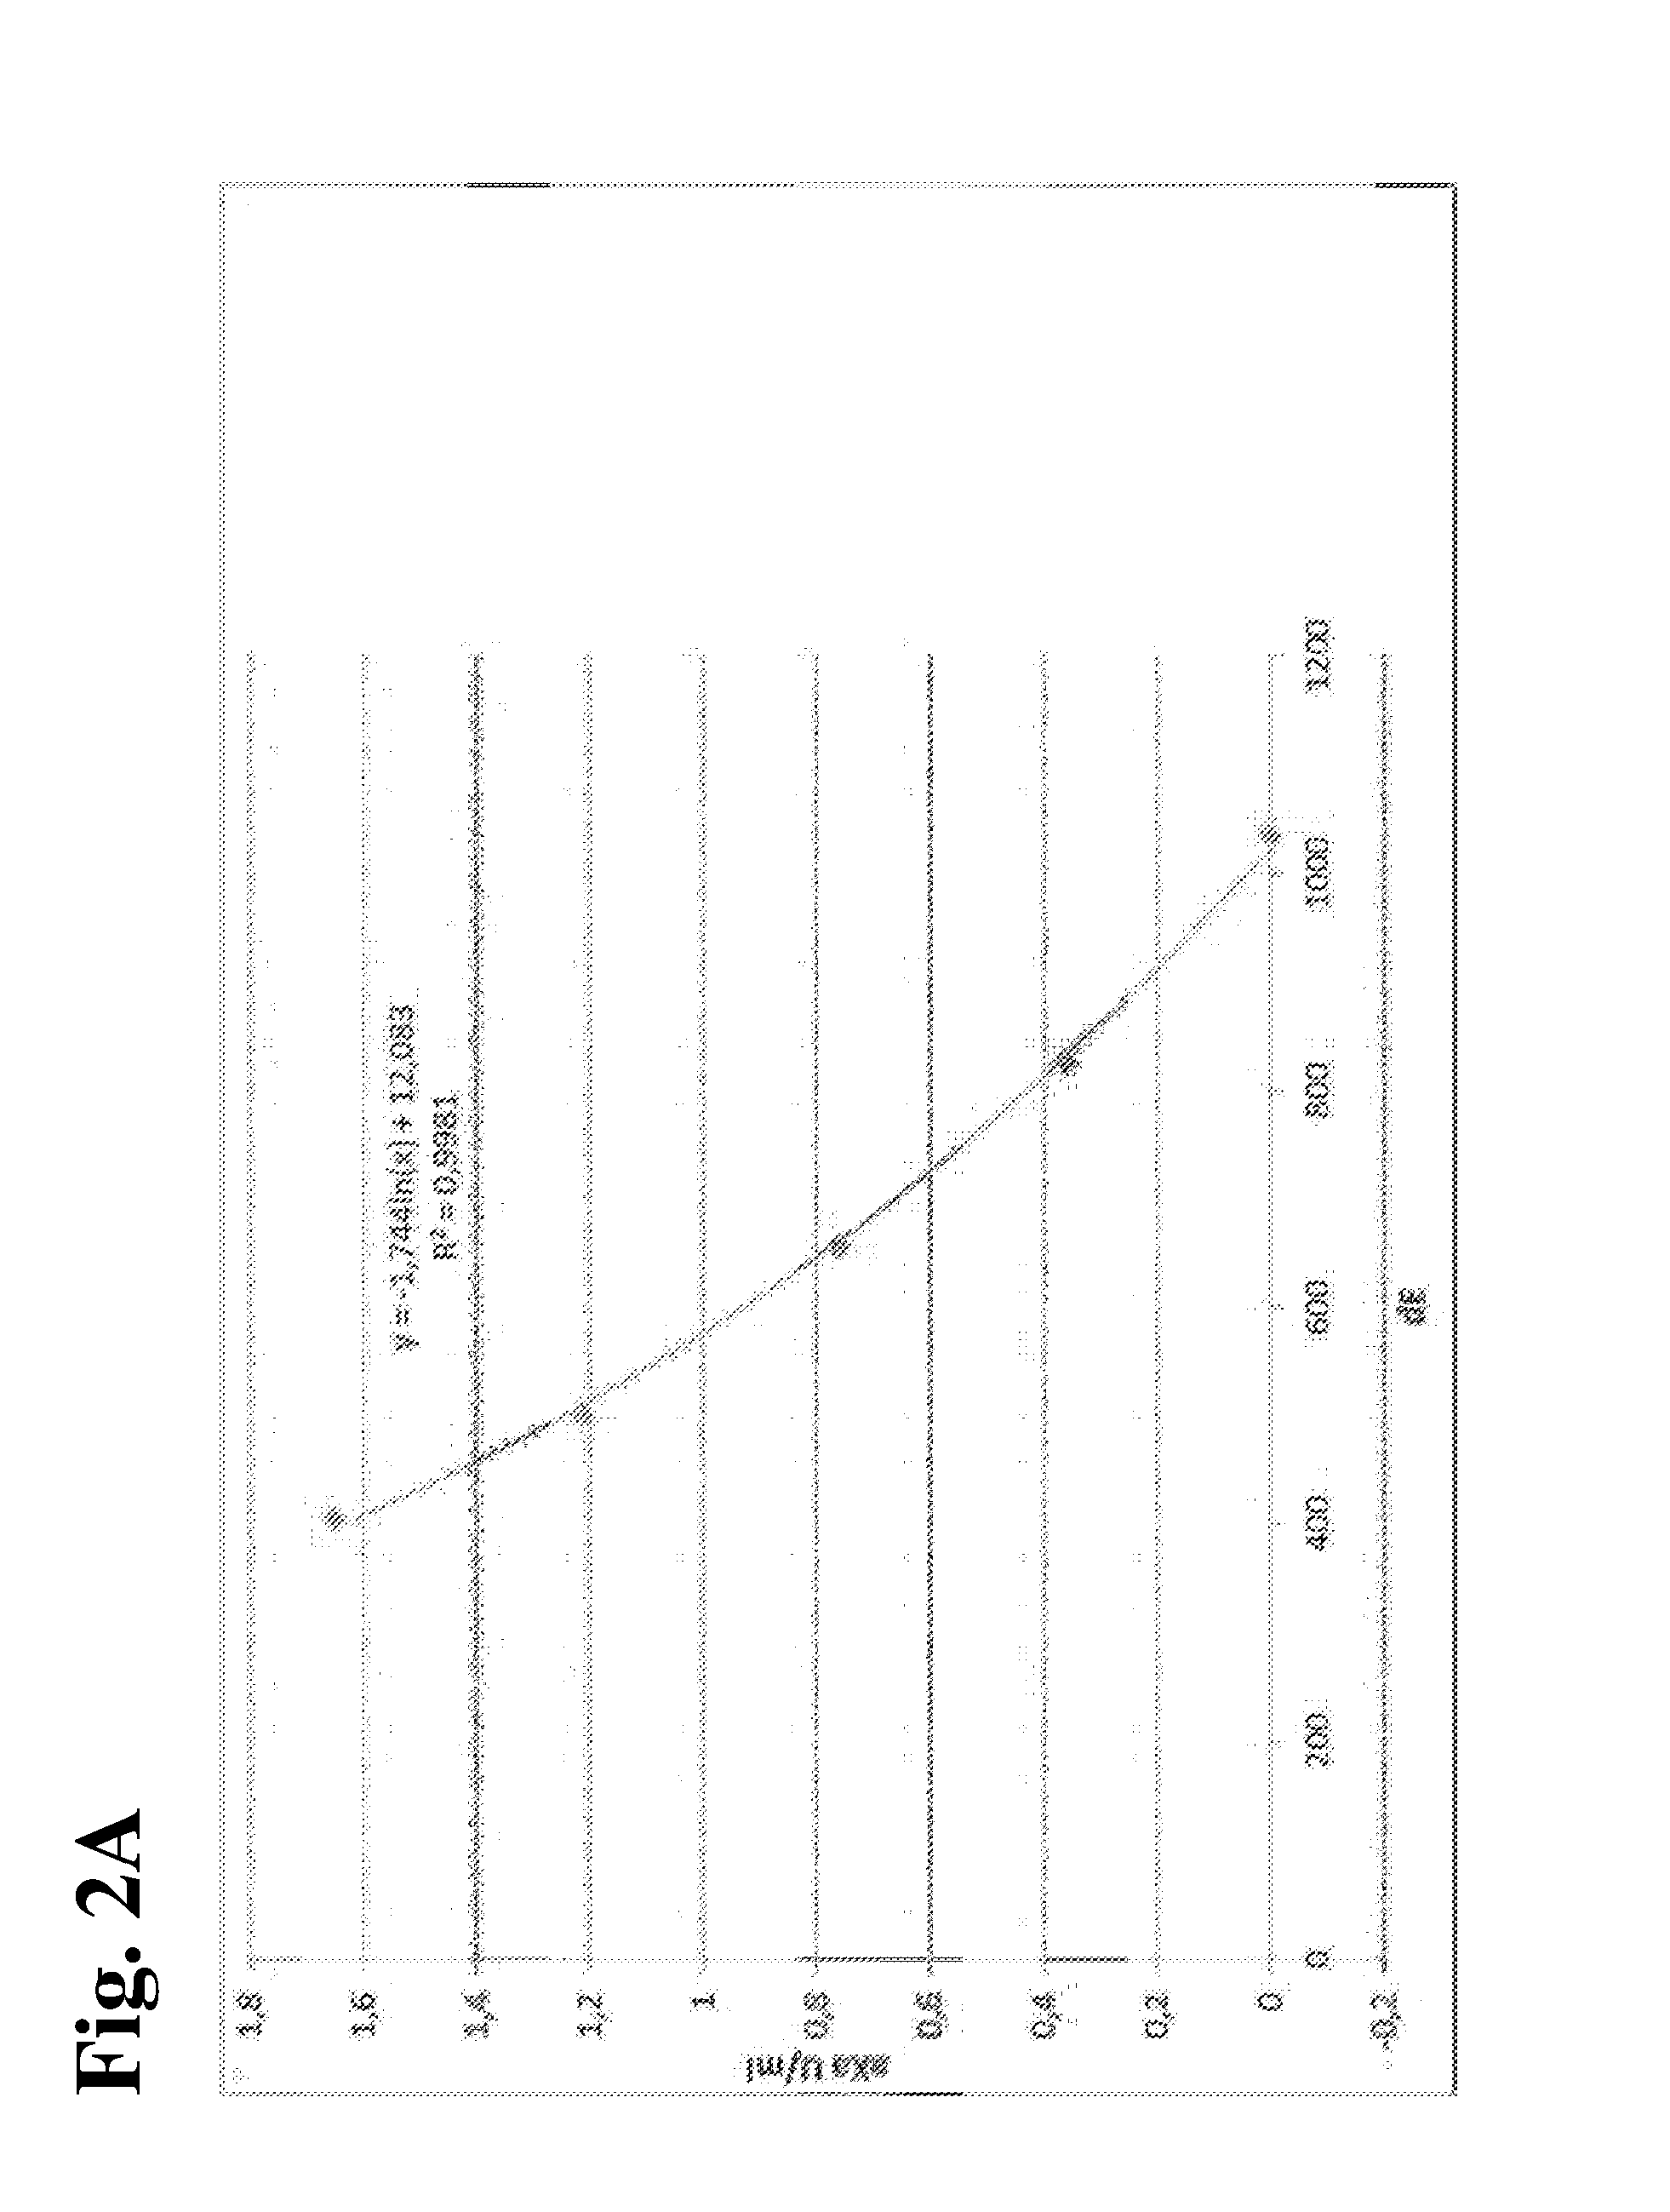 MEANS AND METHODS FOR UNIVERSAL CALIBRATION OF ANTI-FACTOR Xa TESTS